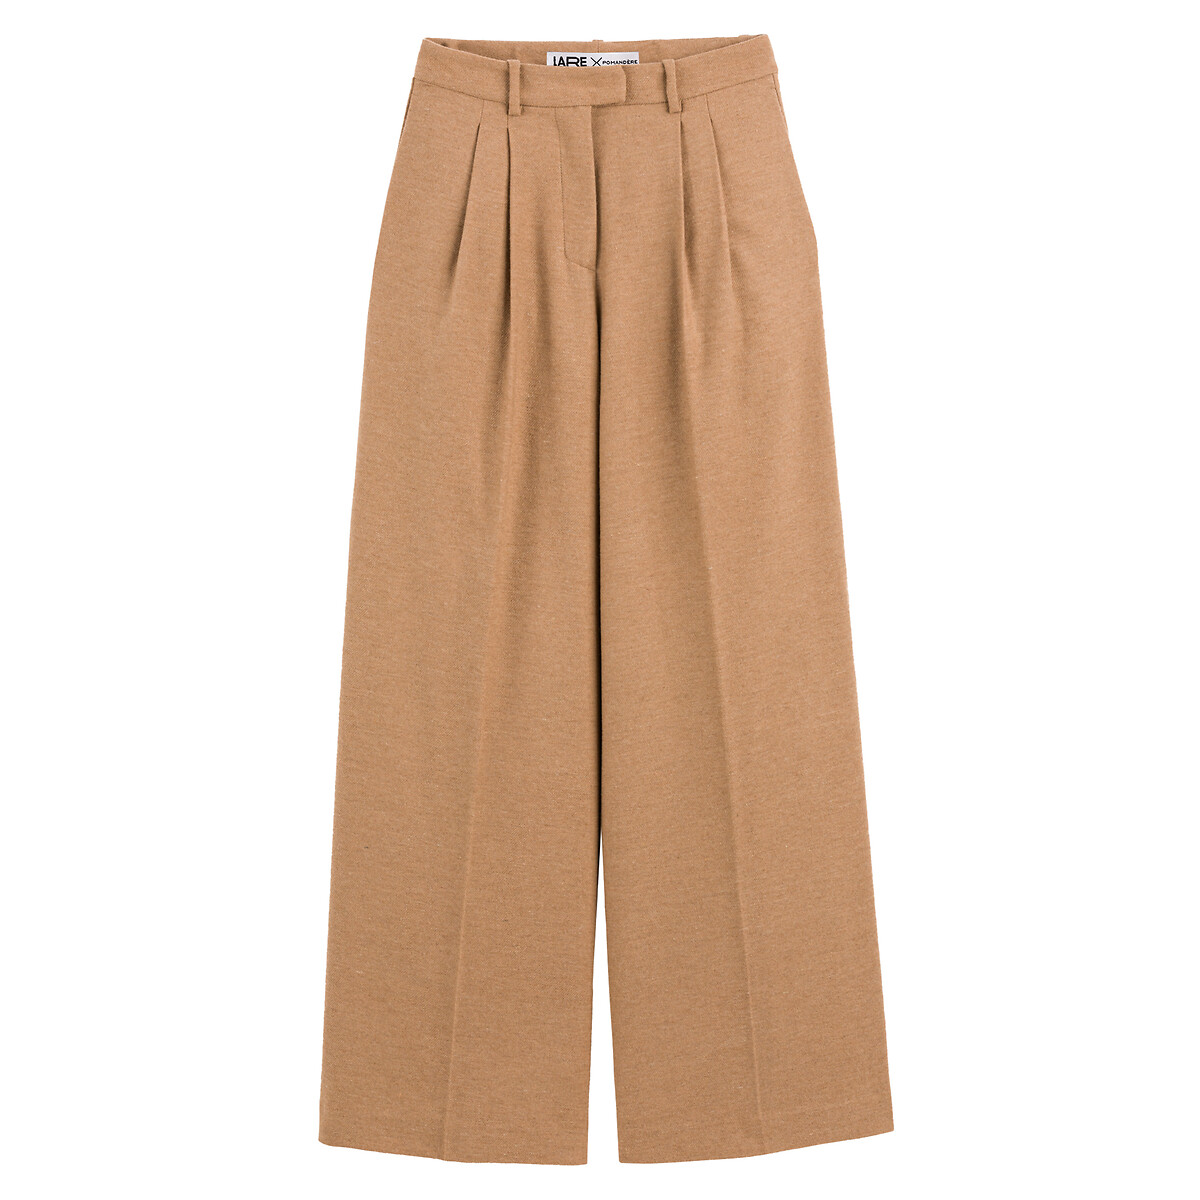 Wide Leg Trousers with Pleat Front and High Waist, Length 28.5"